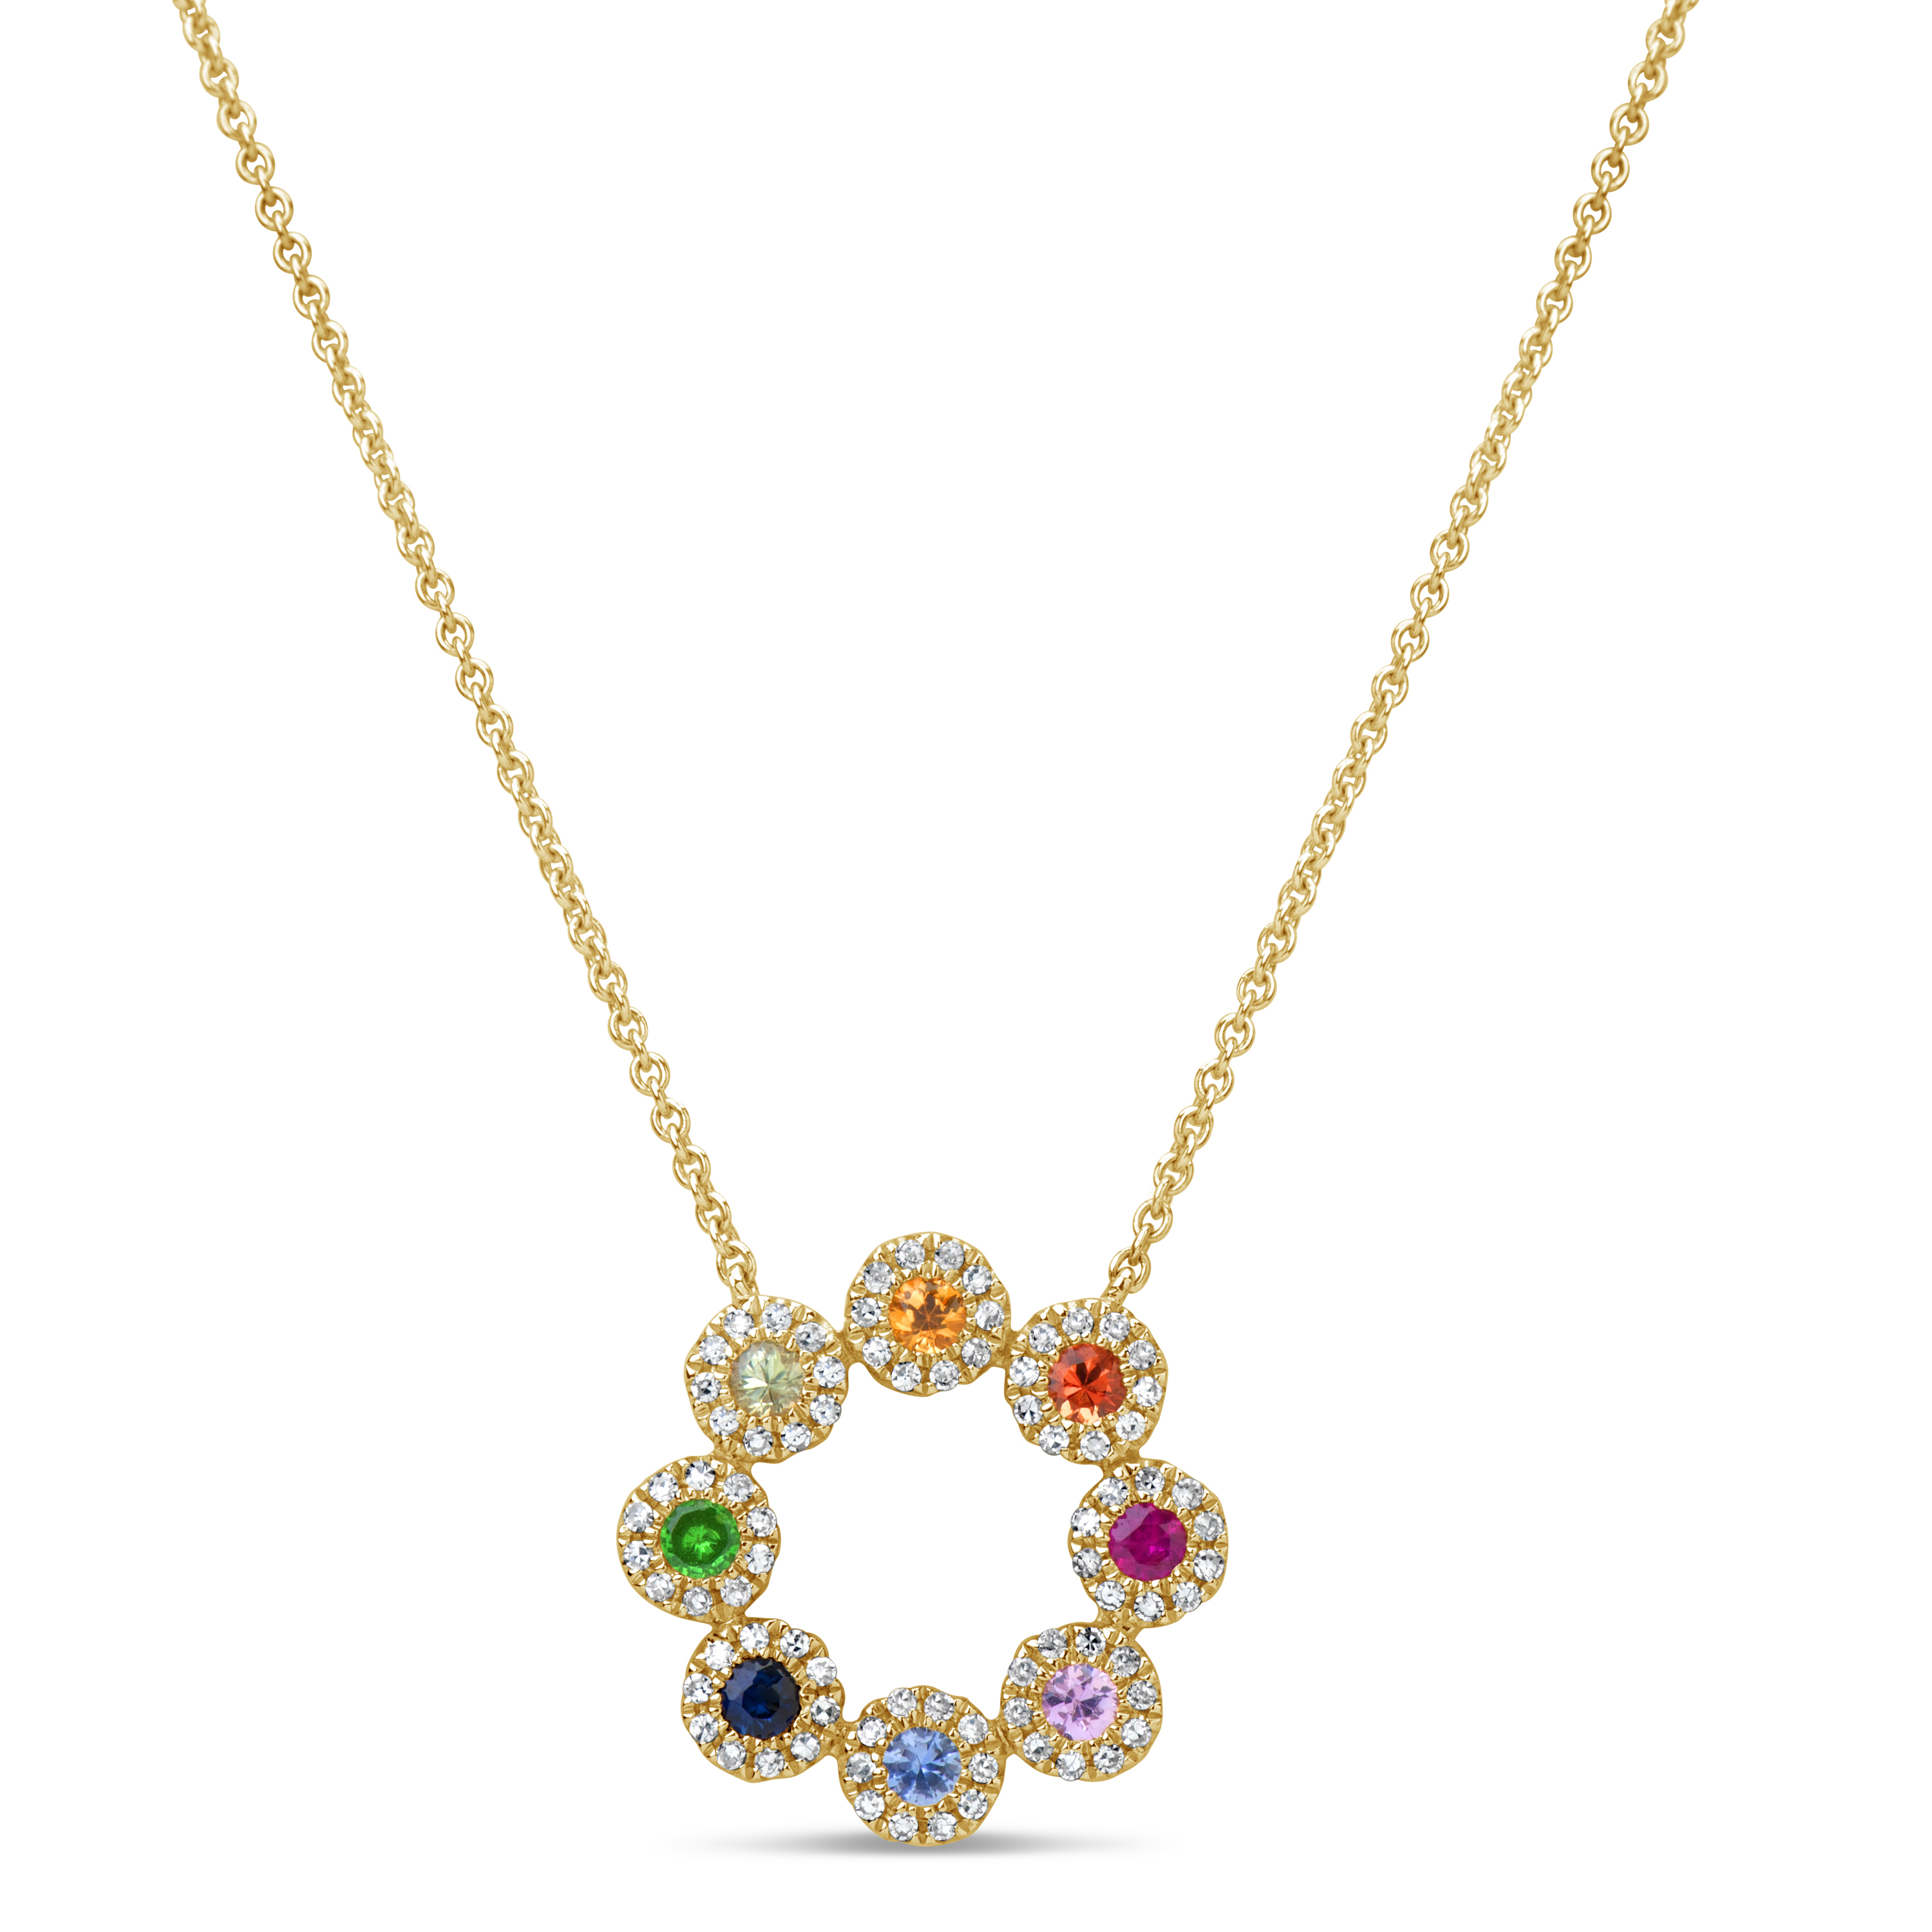 YELLOW GOLD NECKLACE WITH RAINBOW GEMSTONES AND DIAMONDS, .44 CT TW -  Howard's Jewelry Center